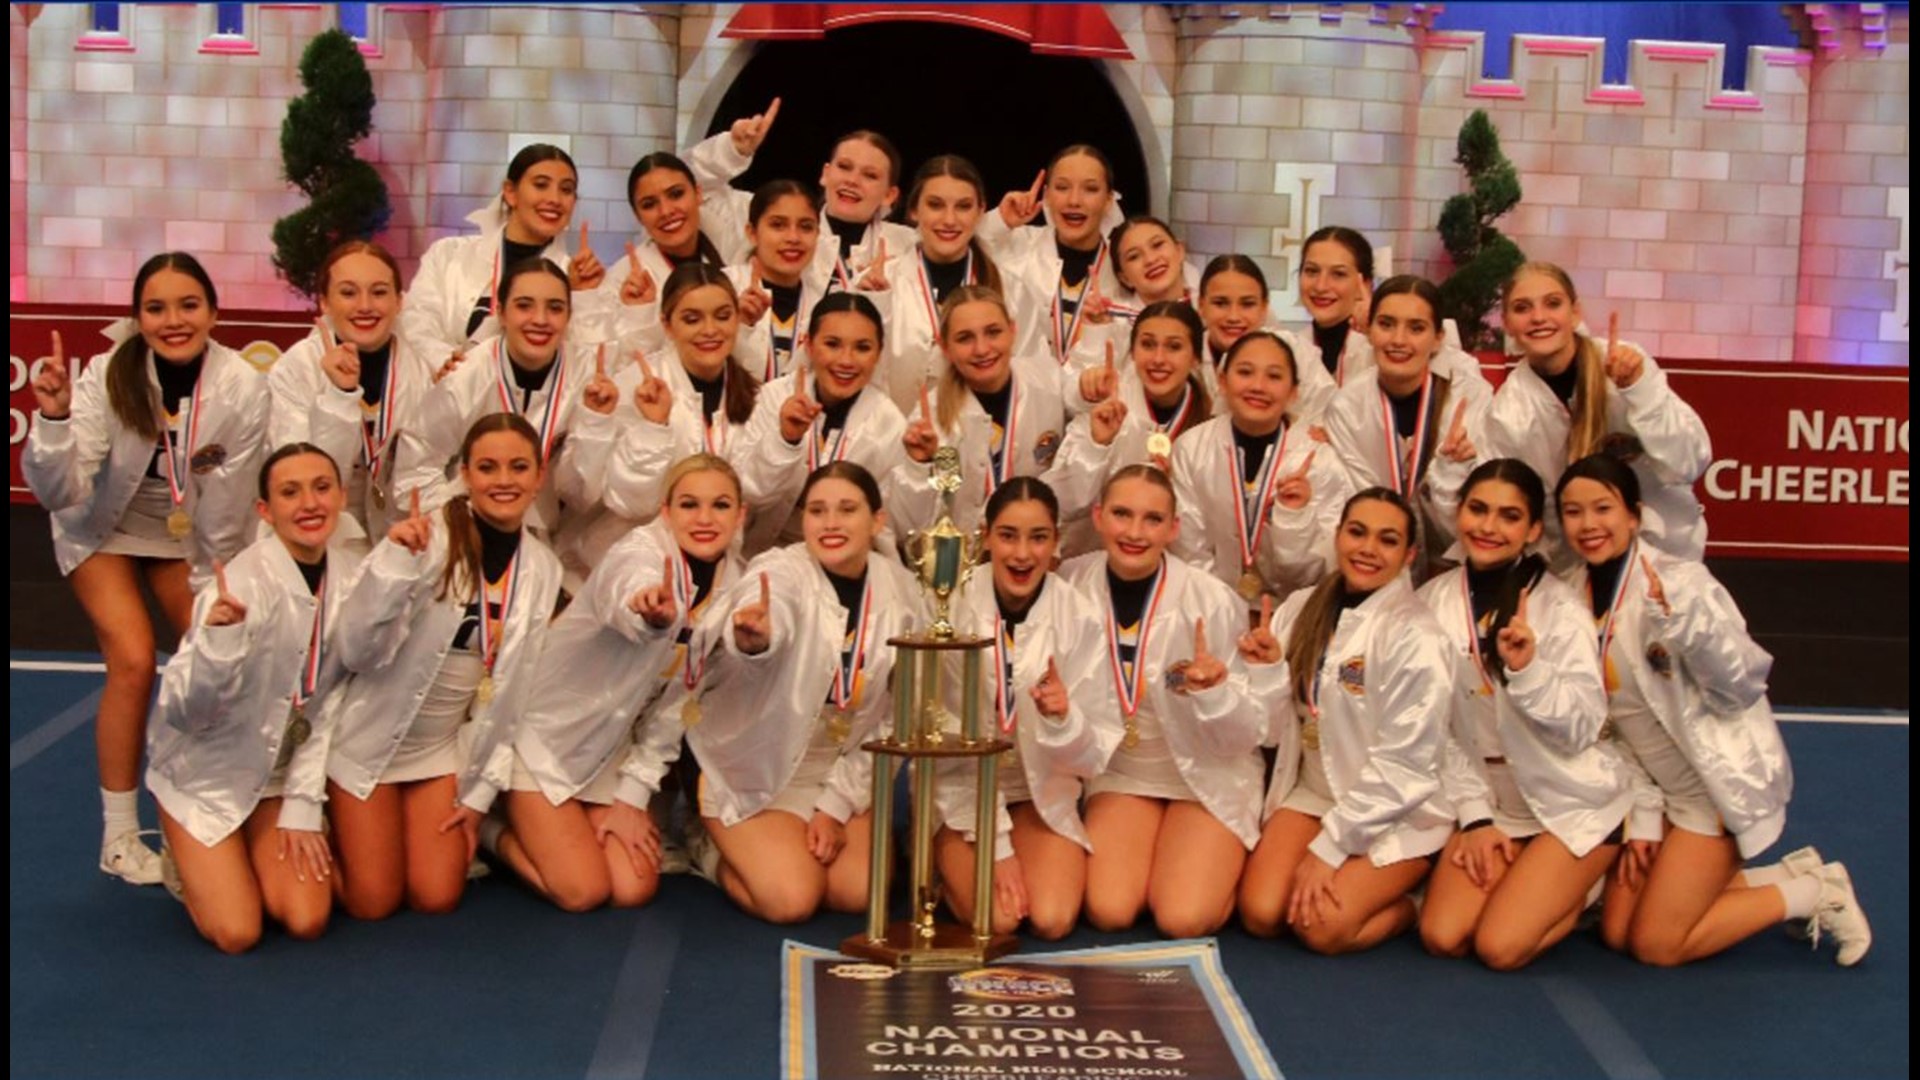 Two Northern California high school cheer teams are rocking their National Championship swag on campus after earning the top spot in their respective divisions